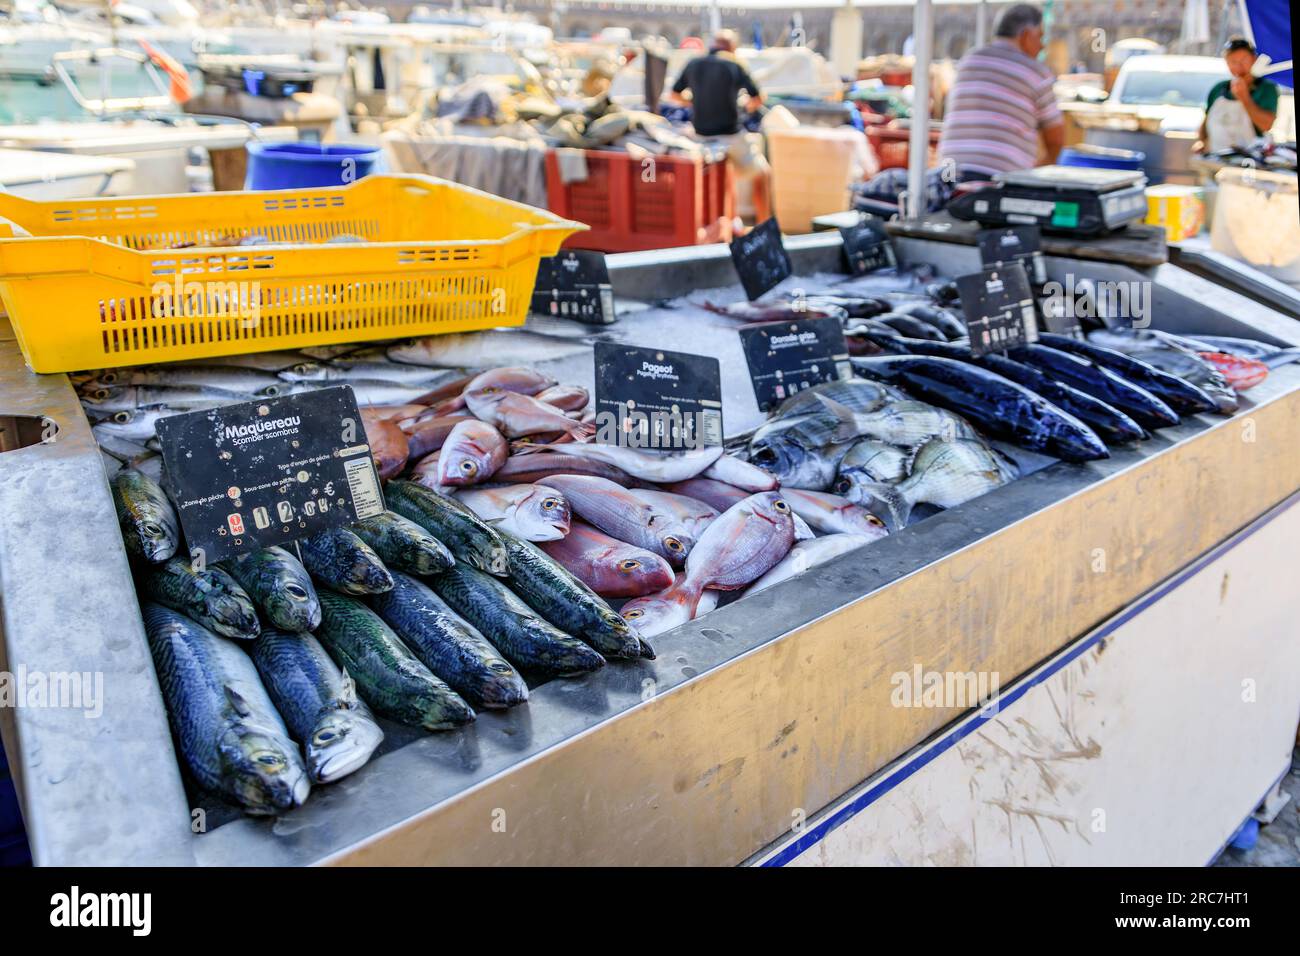 Freshly caught fish, mackerel, sea bream and dorade bass on display at the fish market in the old town or Vieil Antibes, South of France Stock Photo